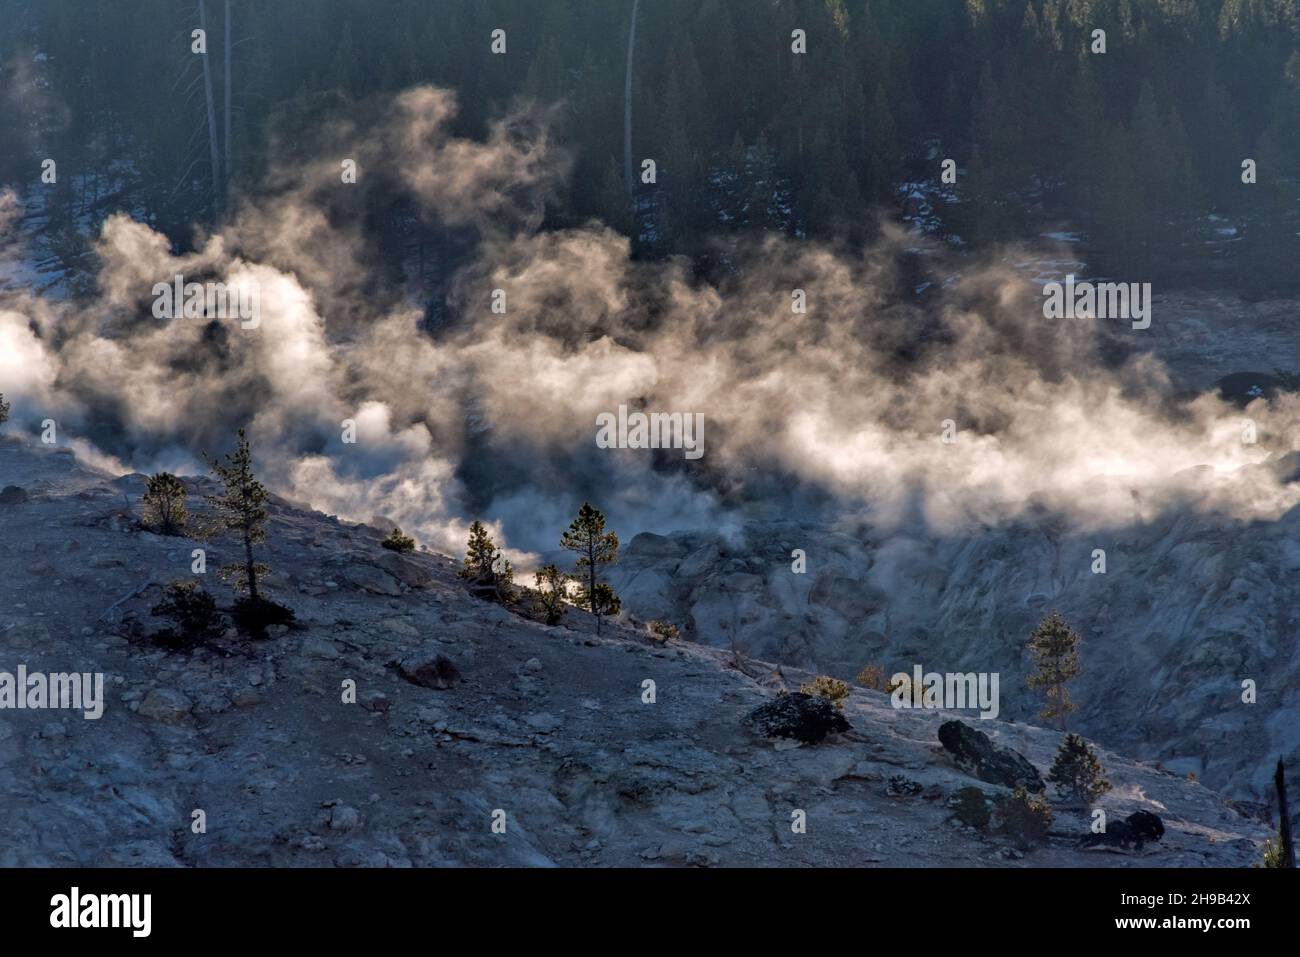 Fumaroles (steam vents) on the hillside of Roaring Mountain, Yellowstone National Park, Wyoming State, USA Stock Photo